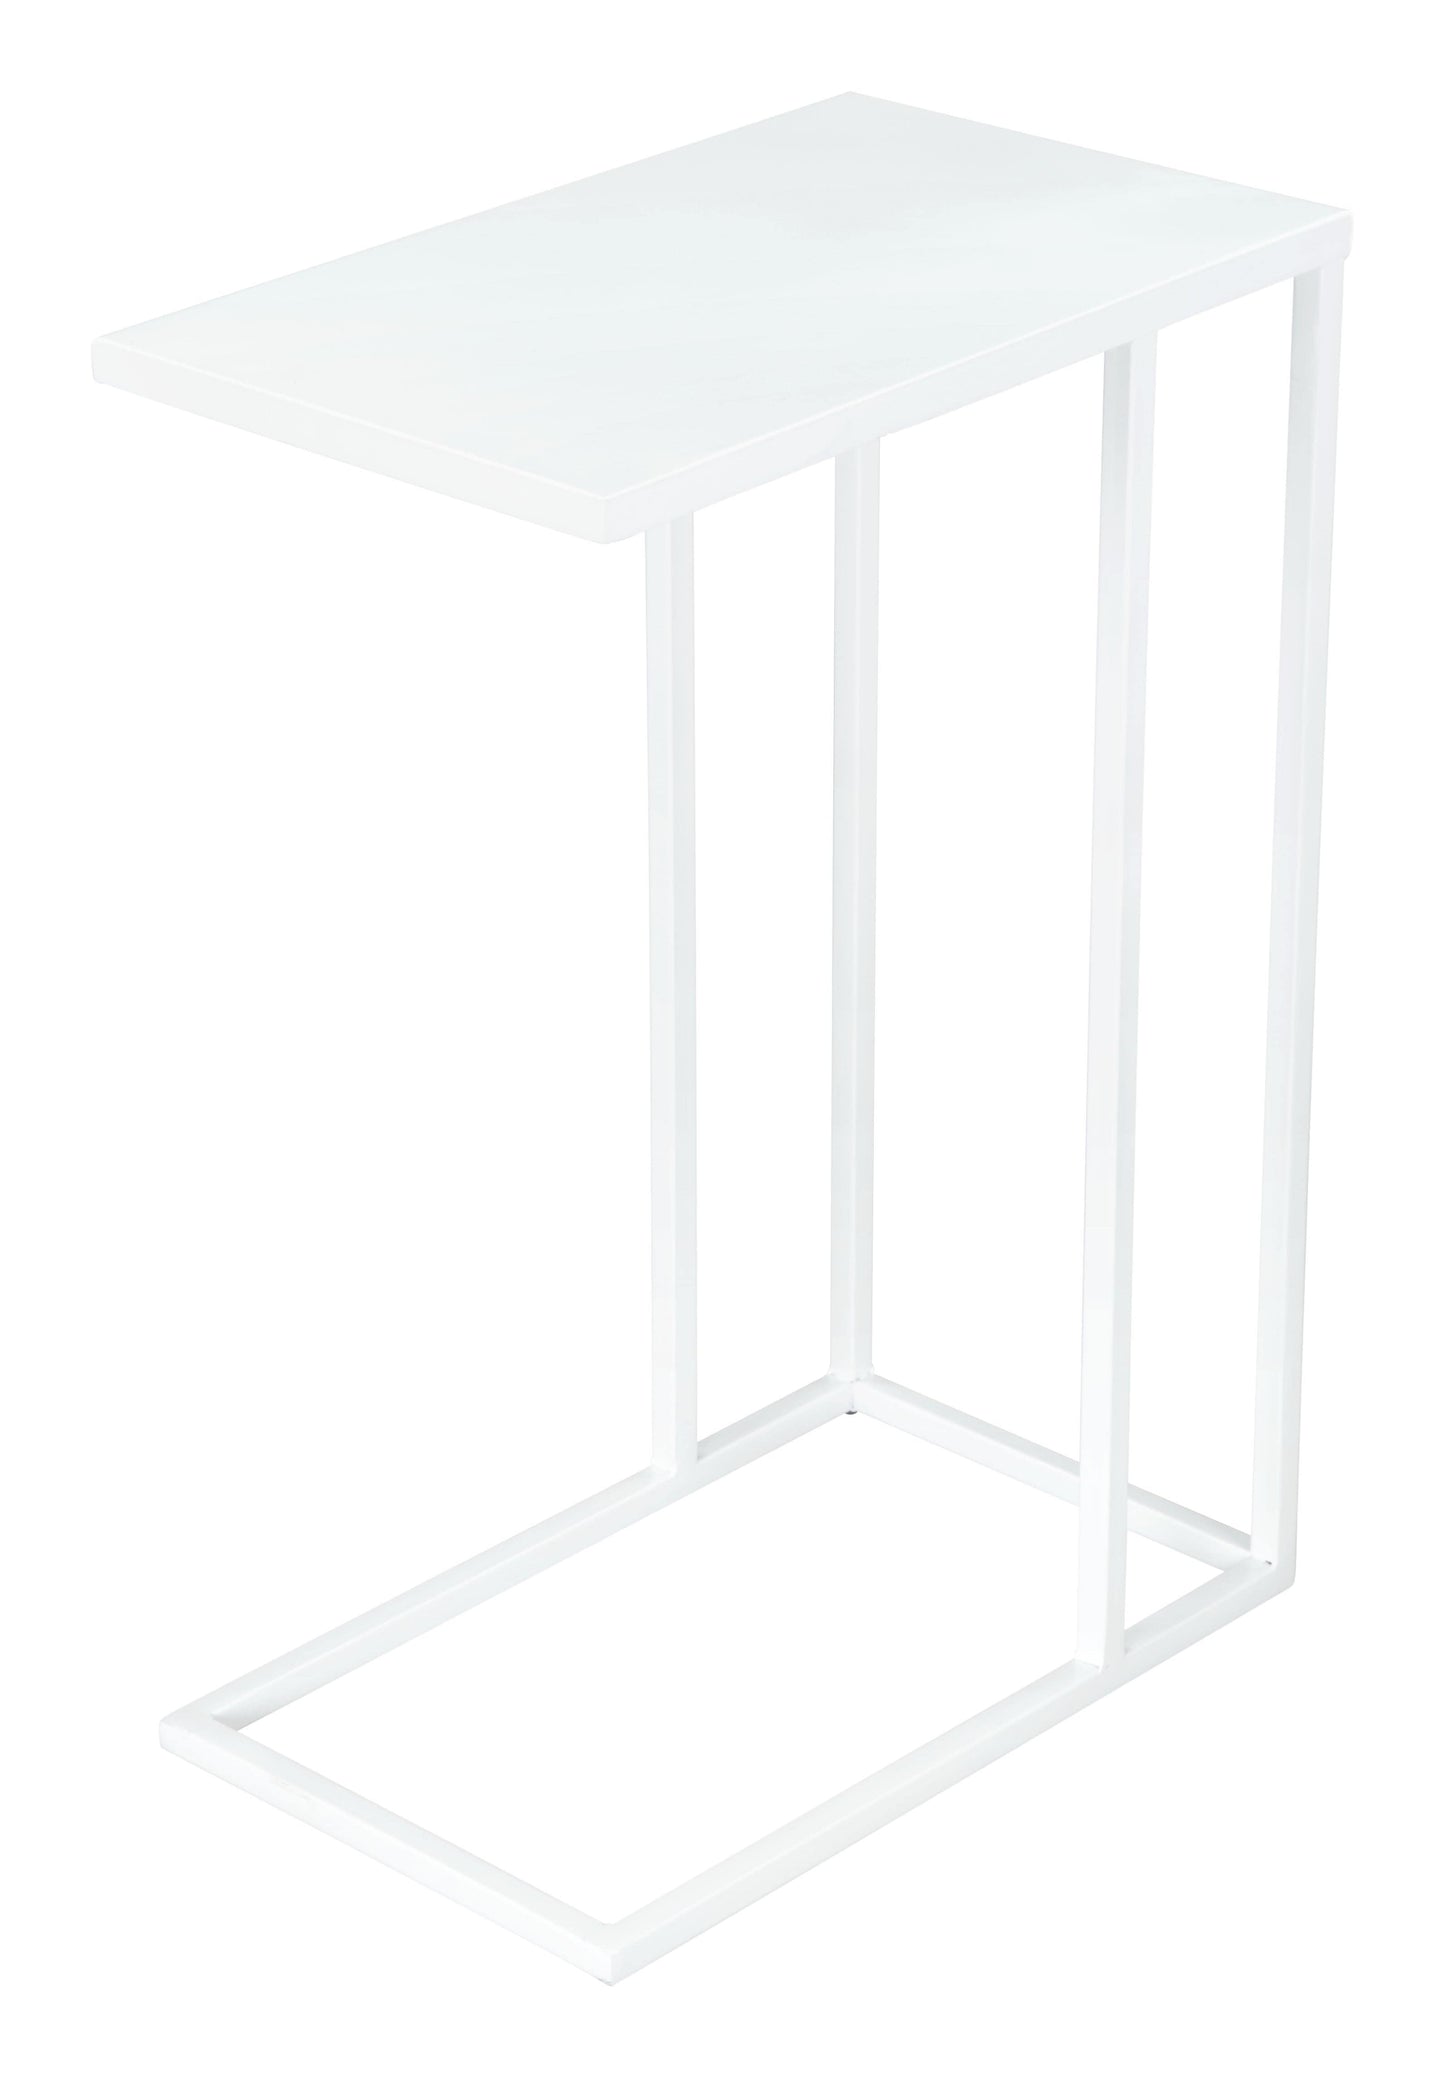 Atom Drink Table in White with Unfortunate white background